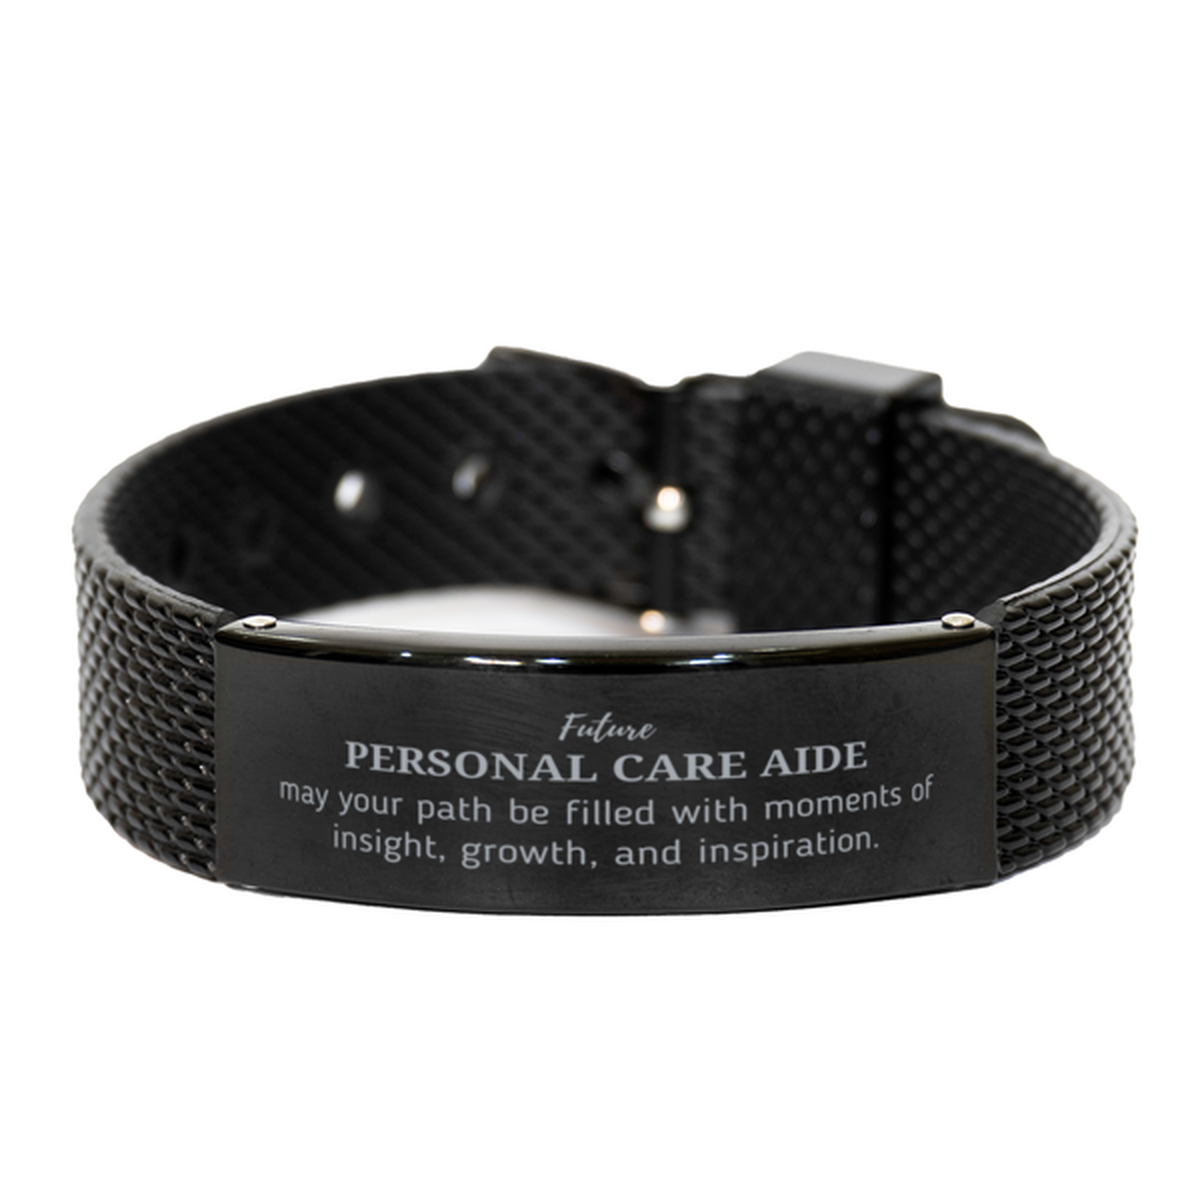 Future Personal Care Aide Gifts, May your path be filled with moments of insight, Graduation Gifts for New Personal Care Aide, Christmas Unique Black Shark Mesh Bracelet For Men, Women, Friends